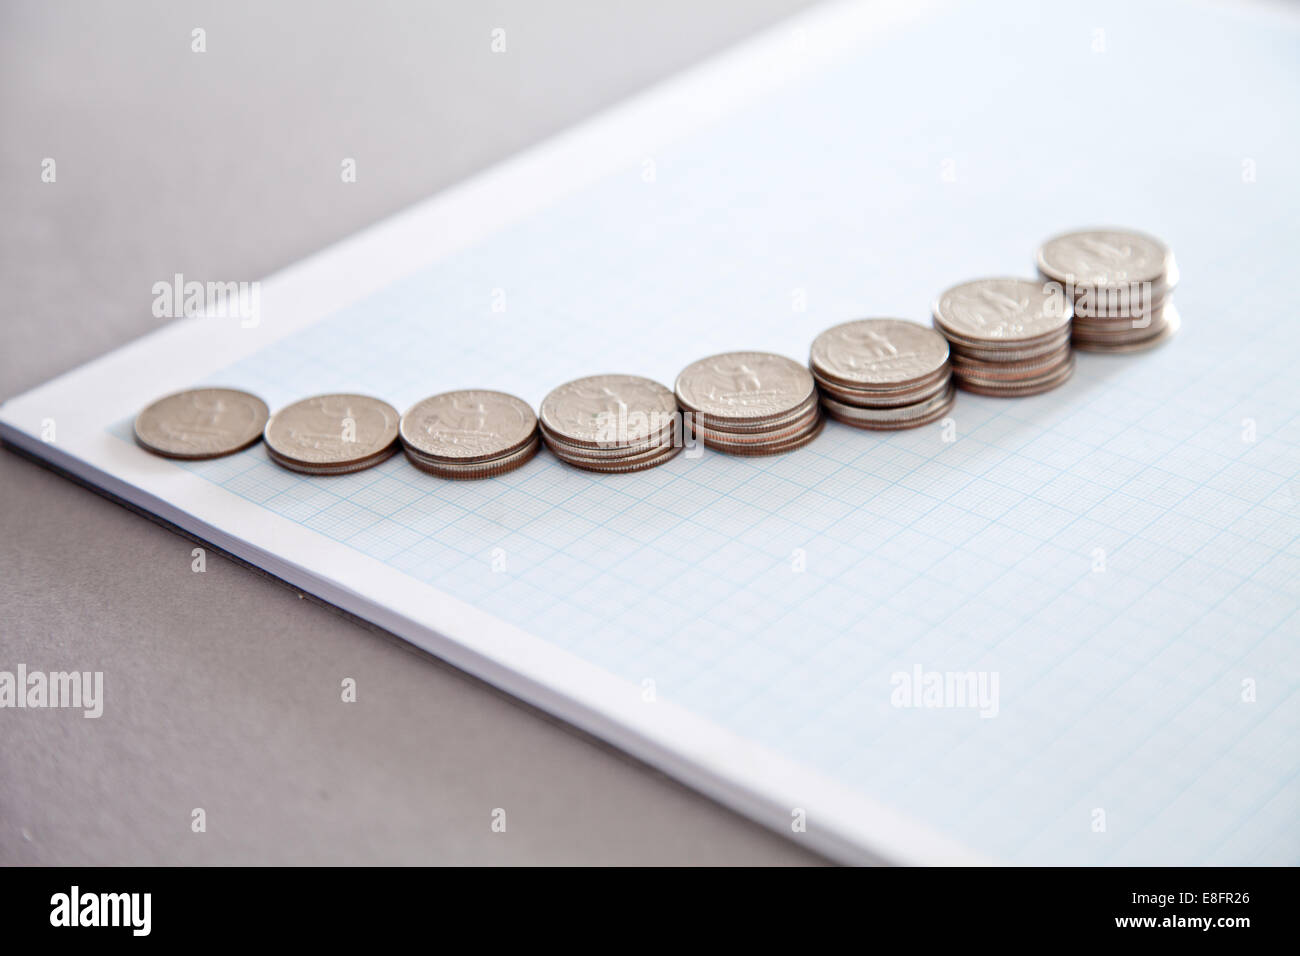 Multiple stacks of US coins on graph paper Stock Photo